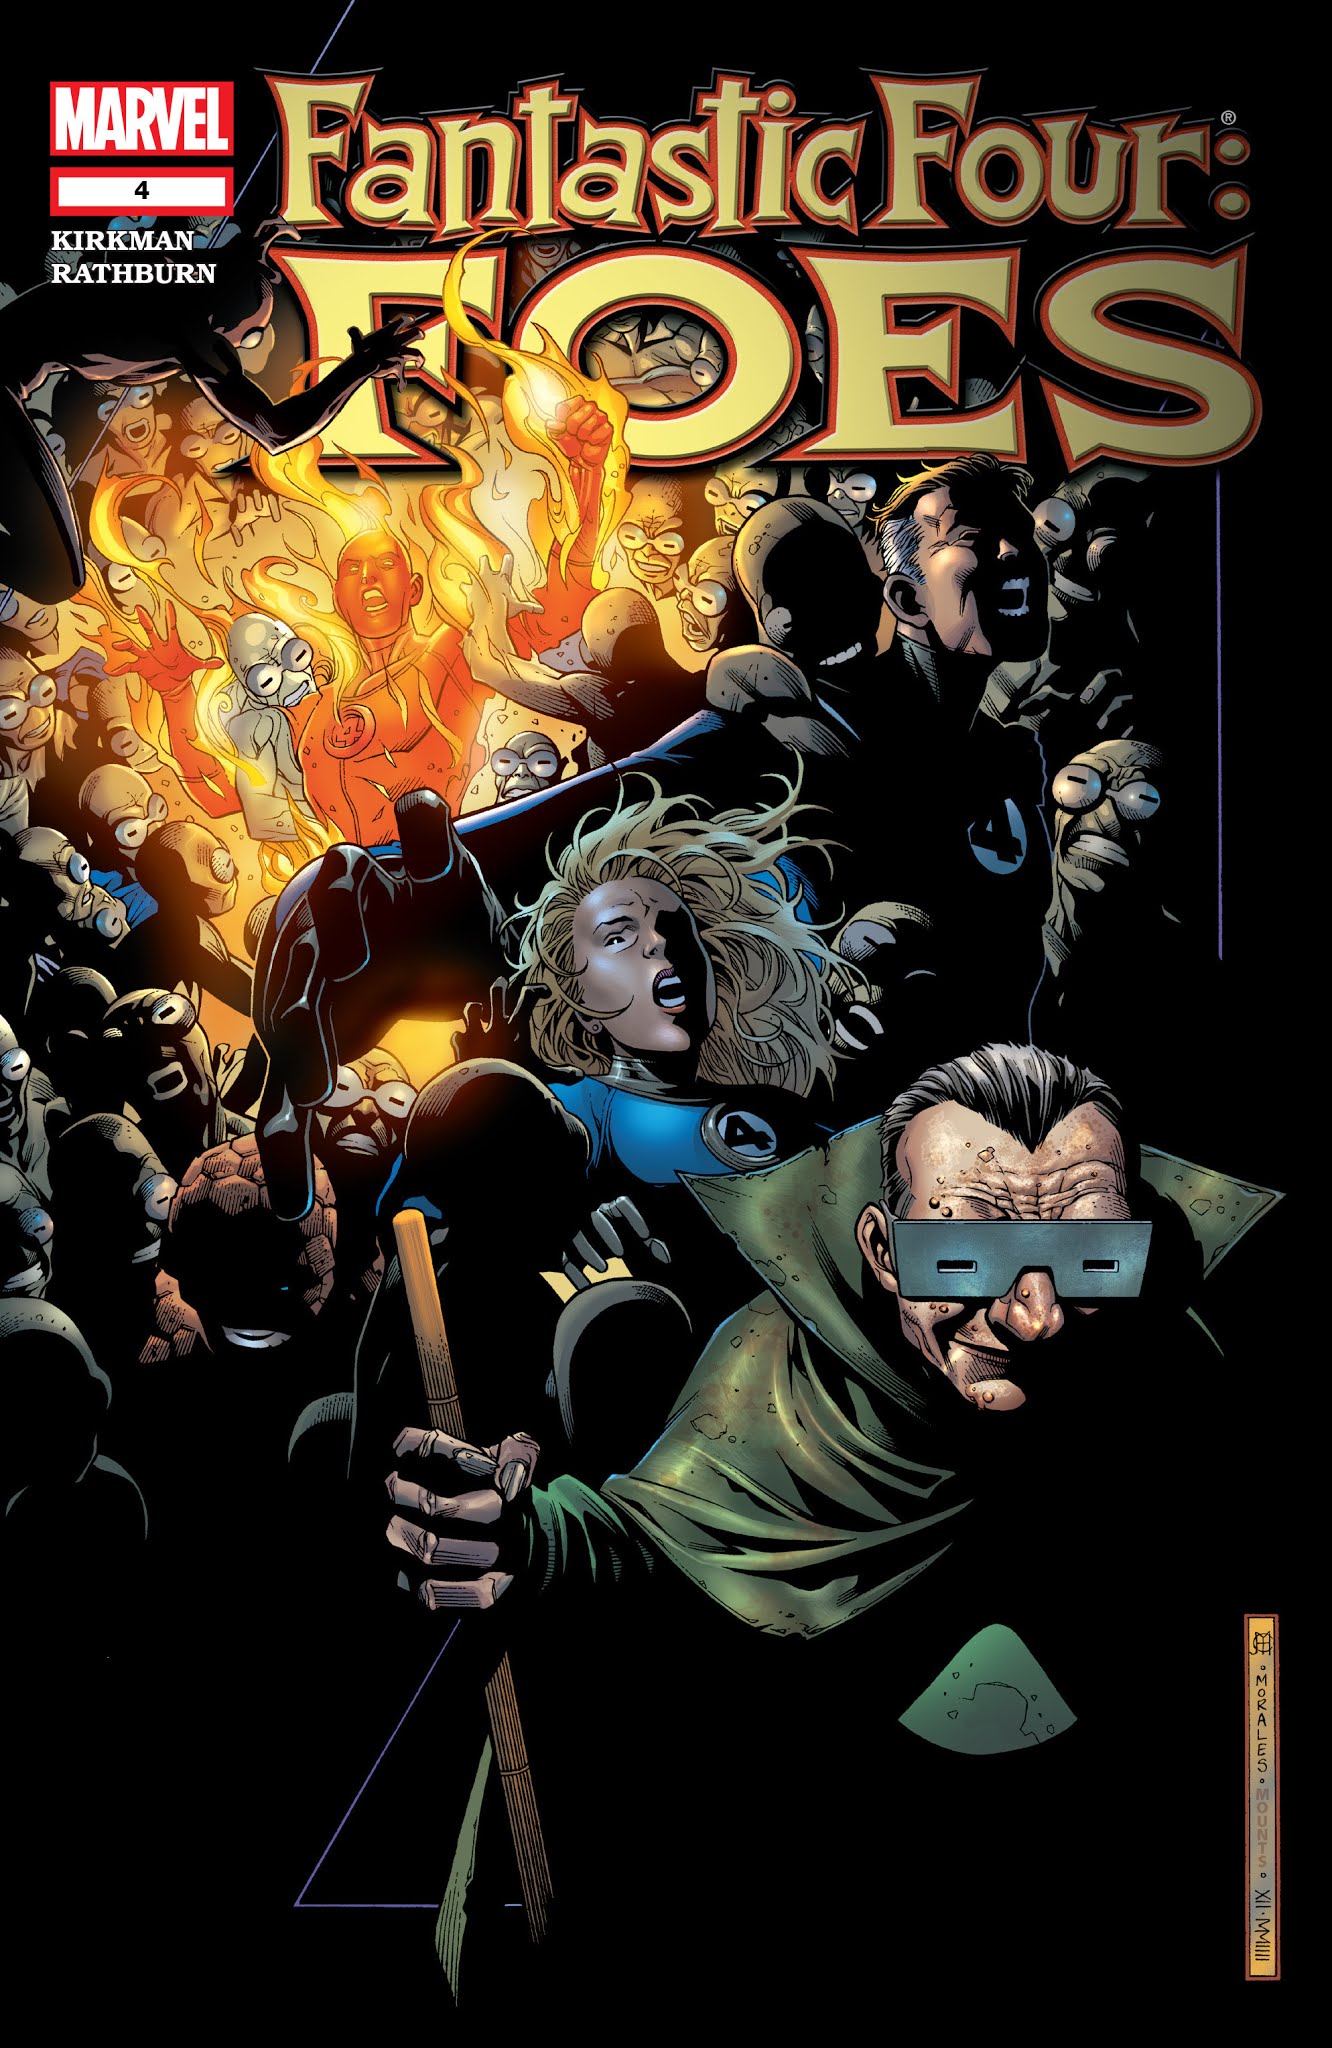 Read online Fantastic Four: Foes comic -  Issue #4 - 1